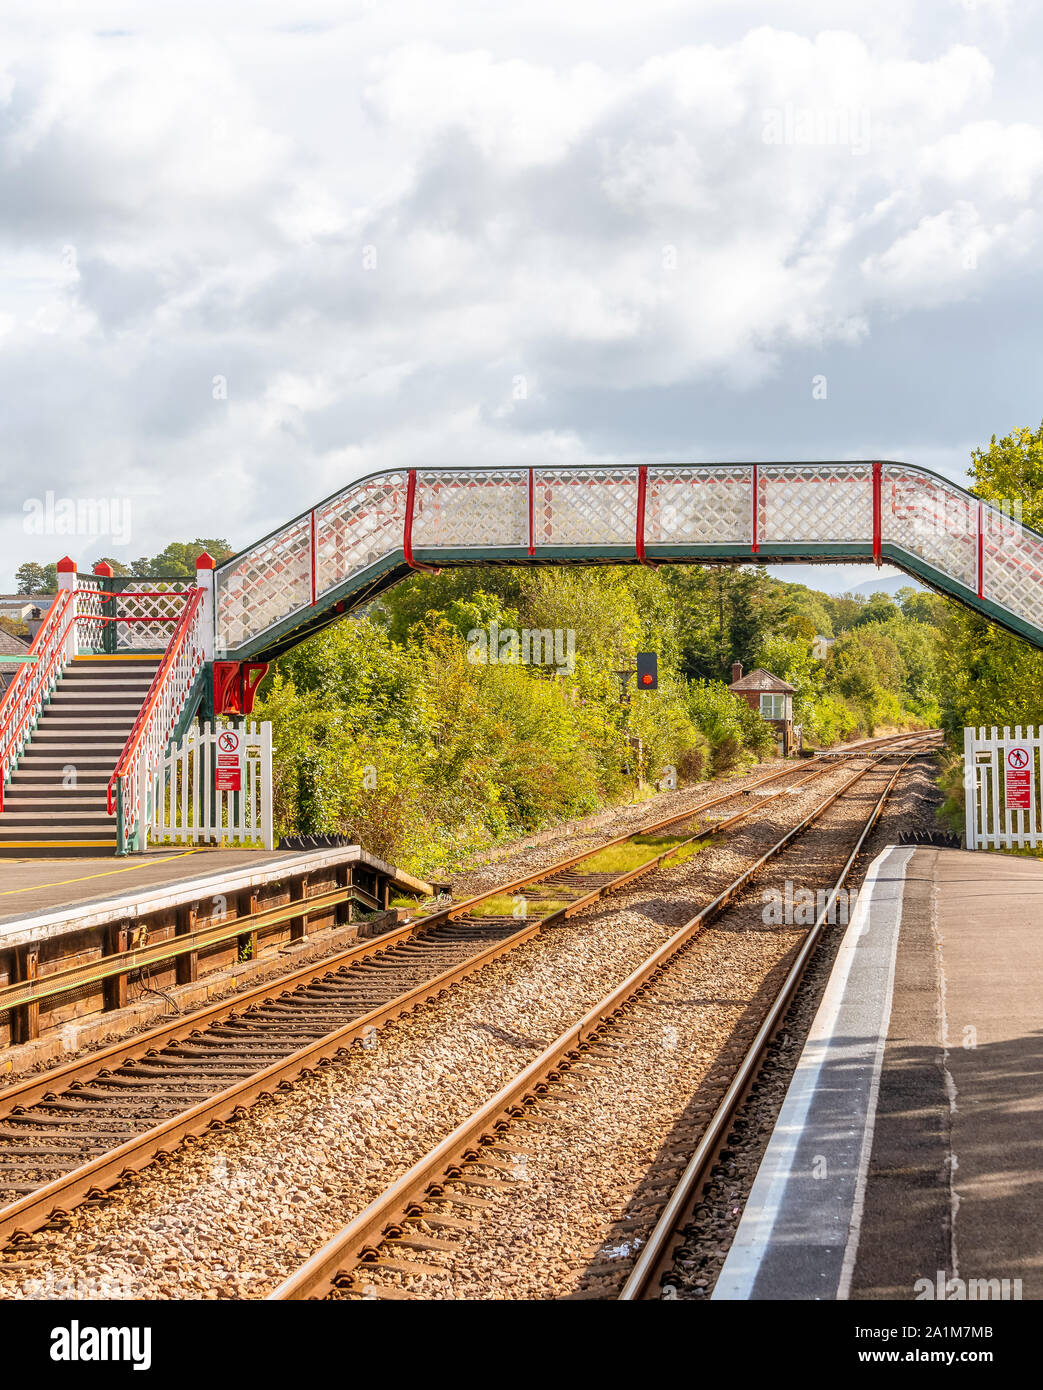 A colourful railway station footbridge at Llanfairpwllgwyngyll, Anglesea in Wales.   Railway lines run underneath and a blue sky with clouds overhead. Stock Photo